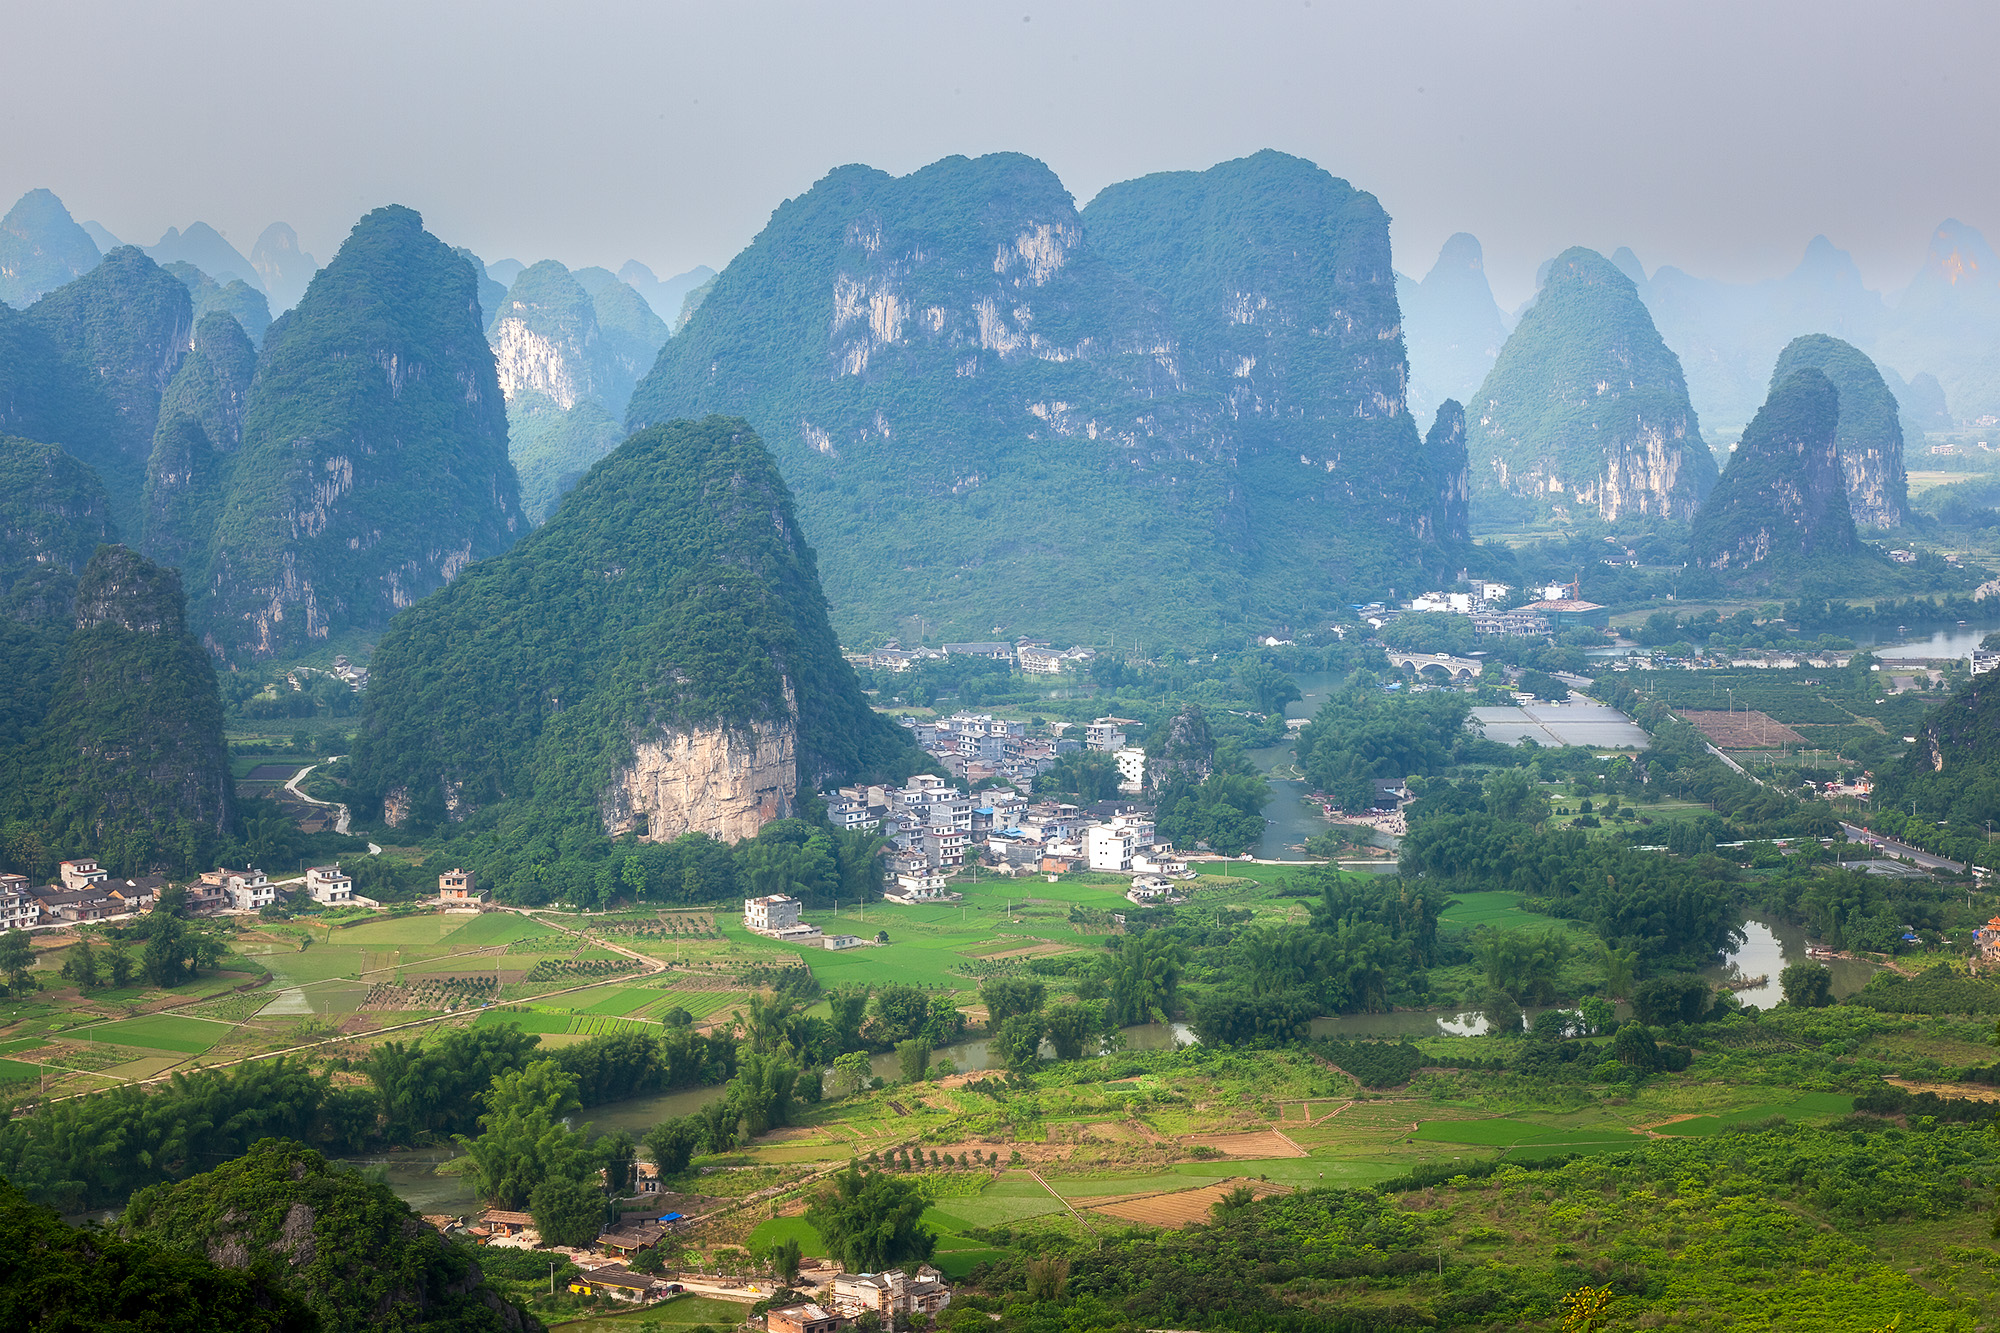 This image, captured from the summit of Moon Hill in Guilin, China, offers a panoramic view of lush green mountains and valleys...